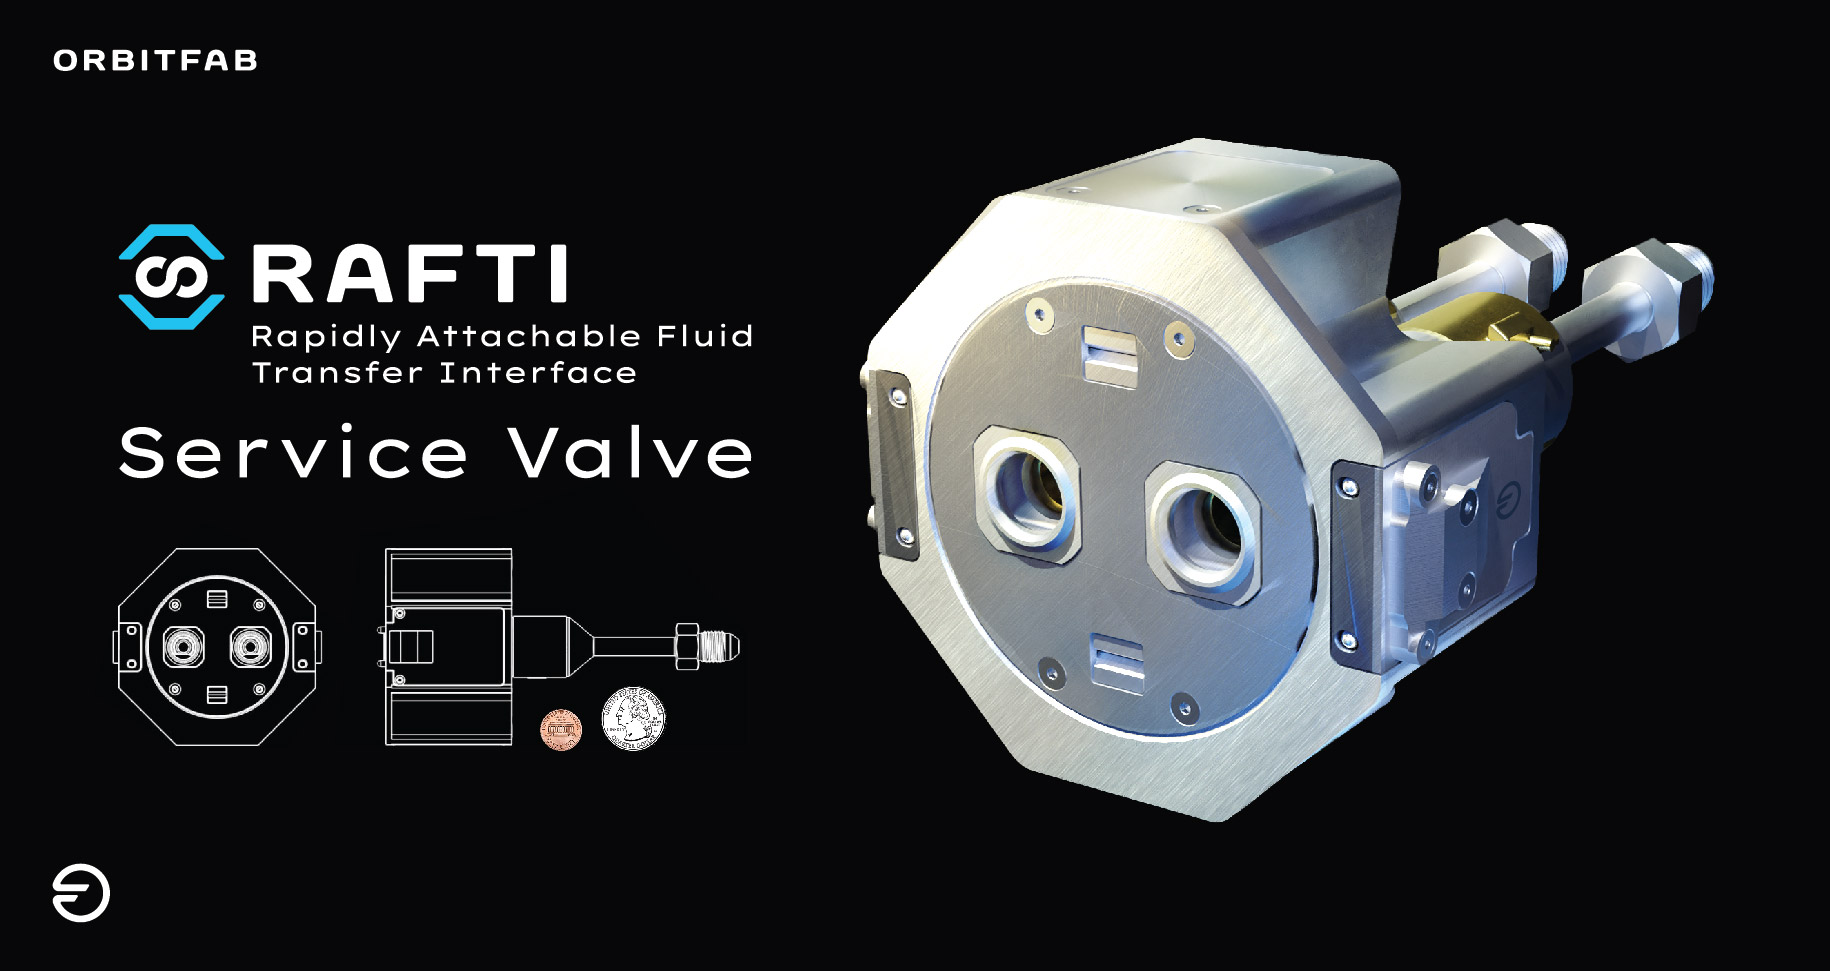 Orbit Fab's RAFTI (Rapidly Attachable Fuel Transfer Interface) Service Valve that enables satellite to be refuel on-orbit.